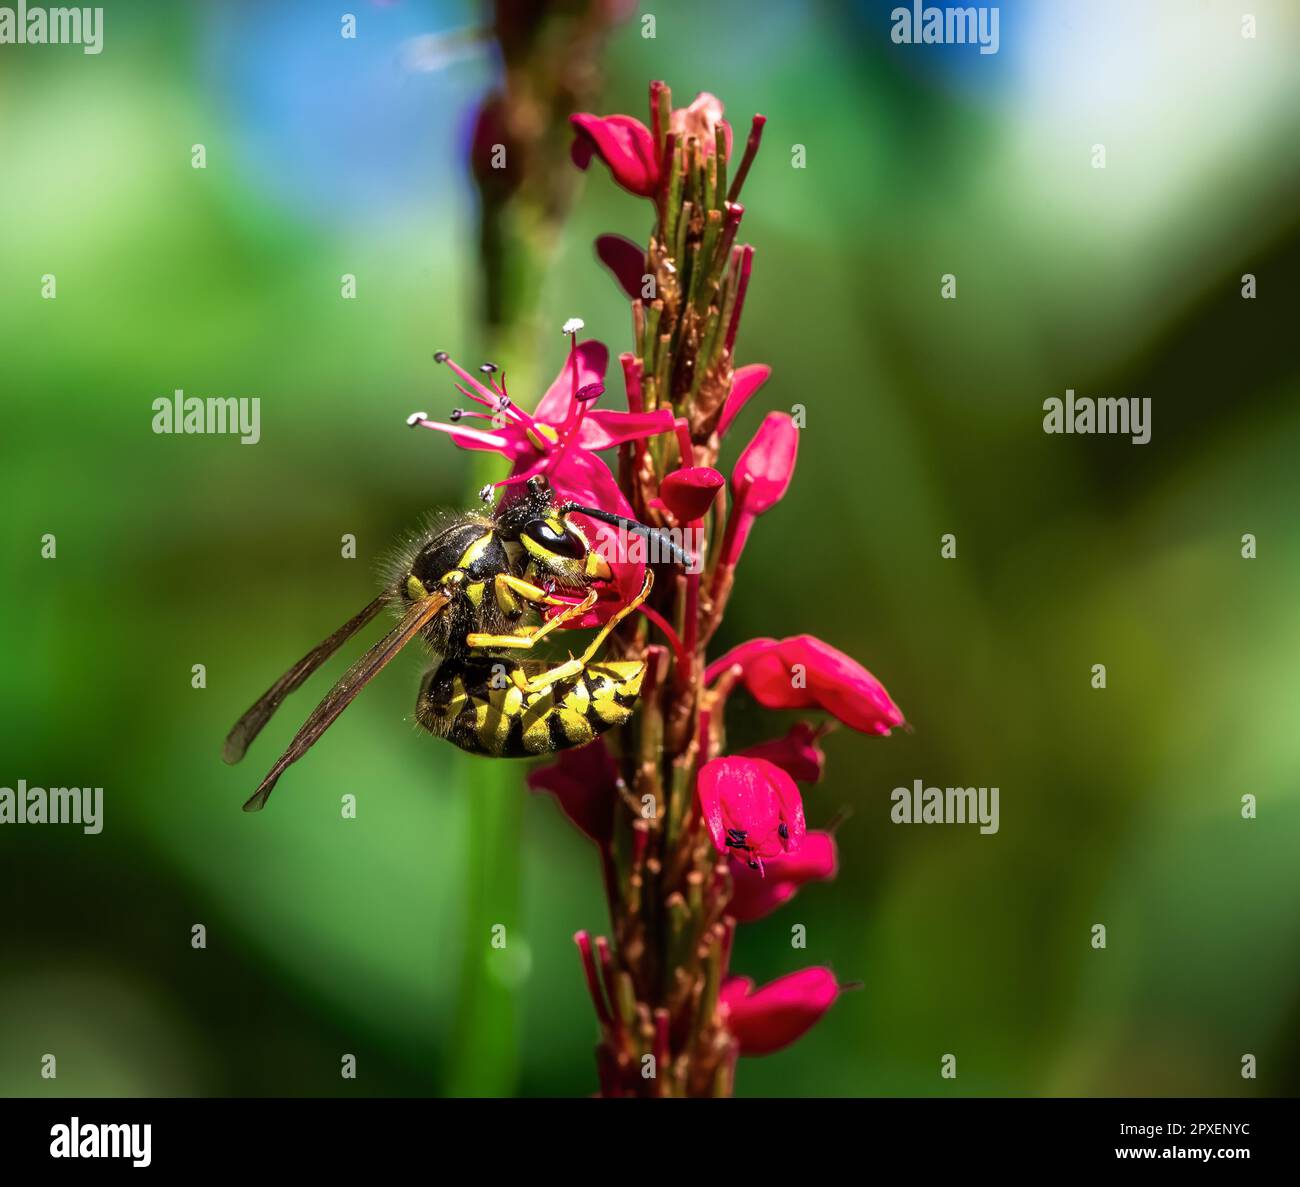 Macro of a wasp on the blossoms of a persicaria flower Stock Photo